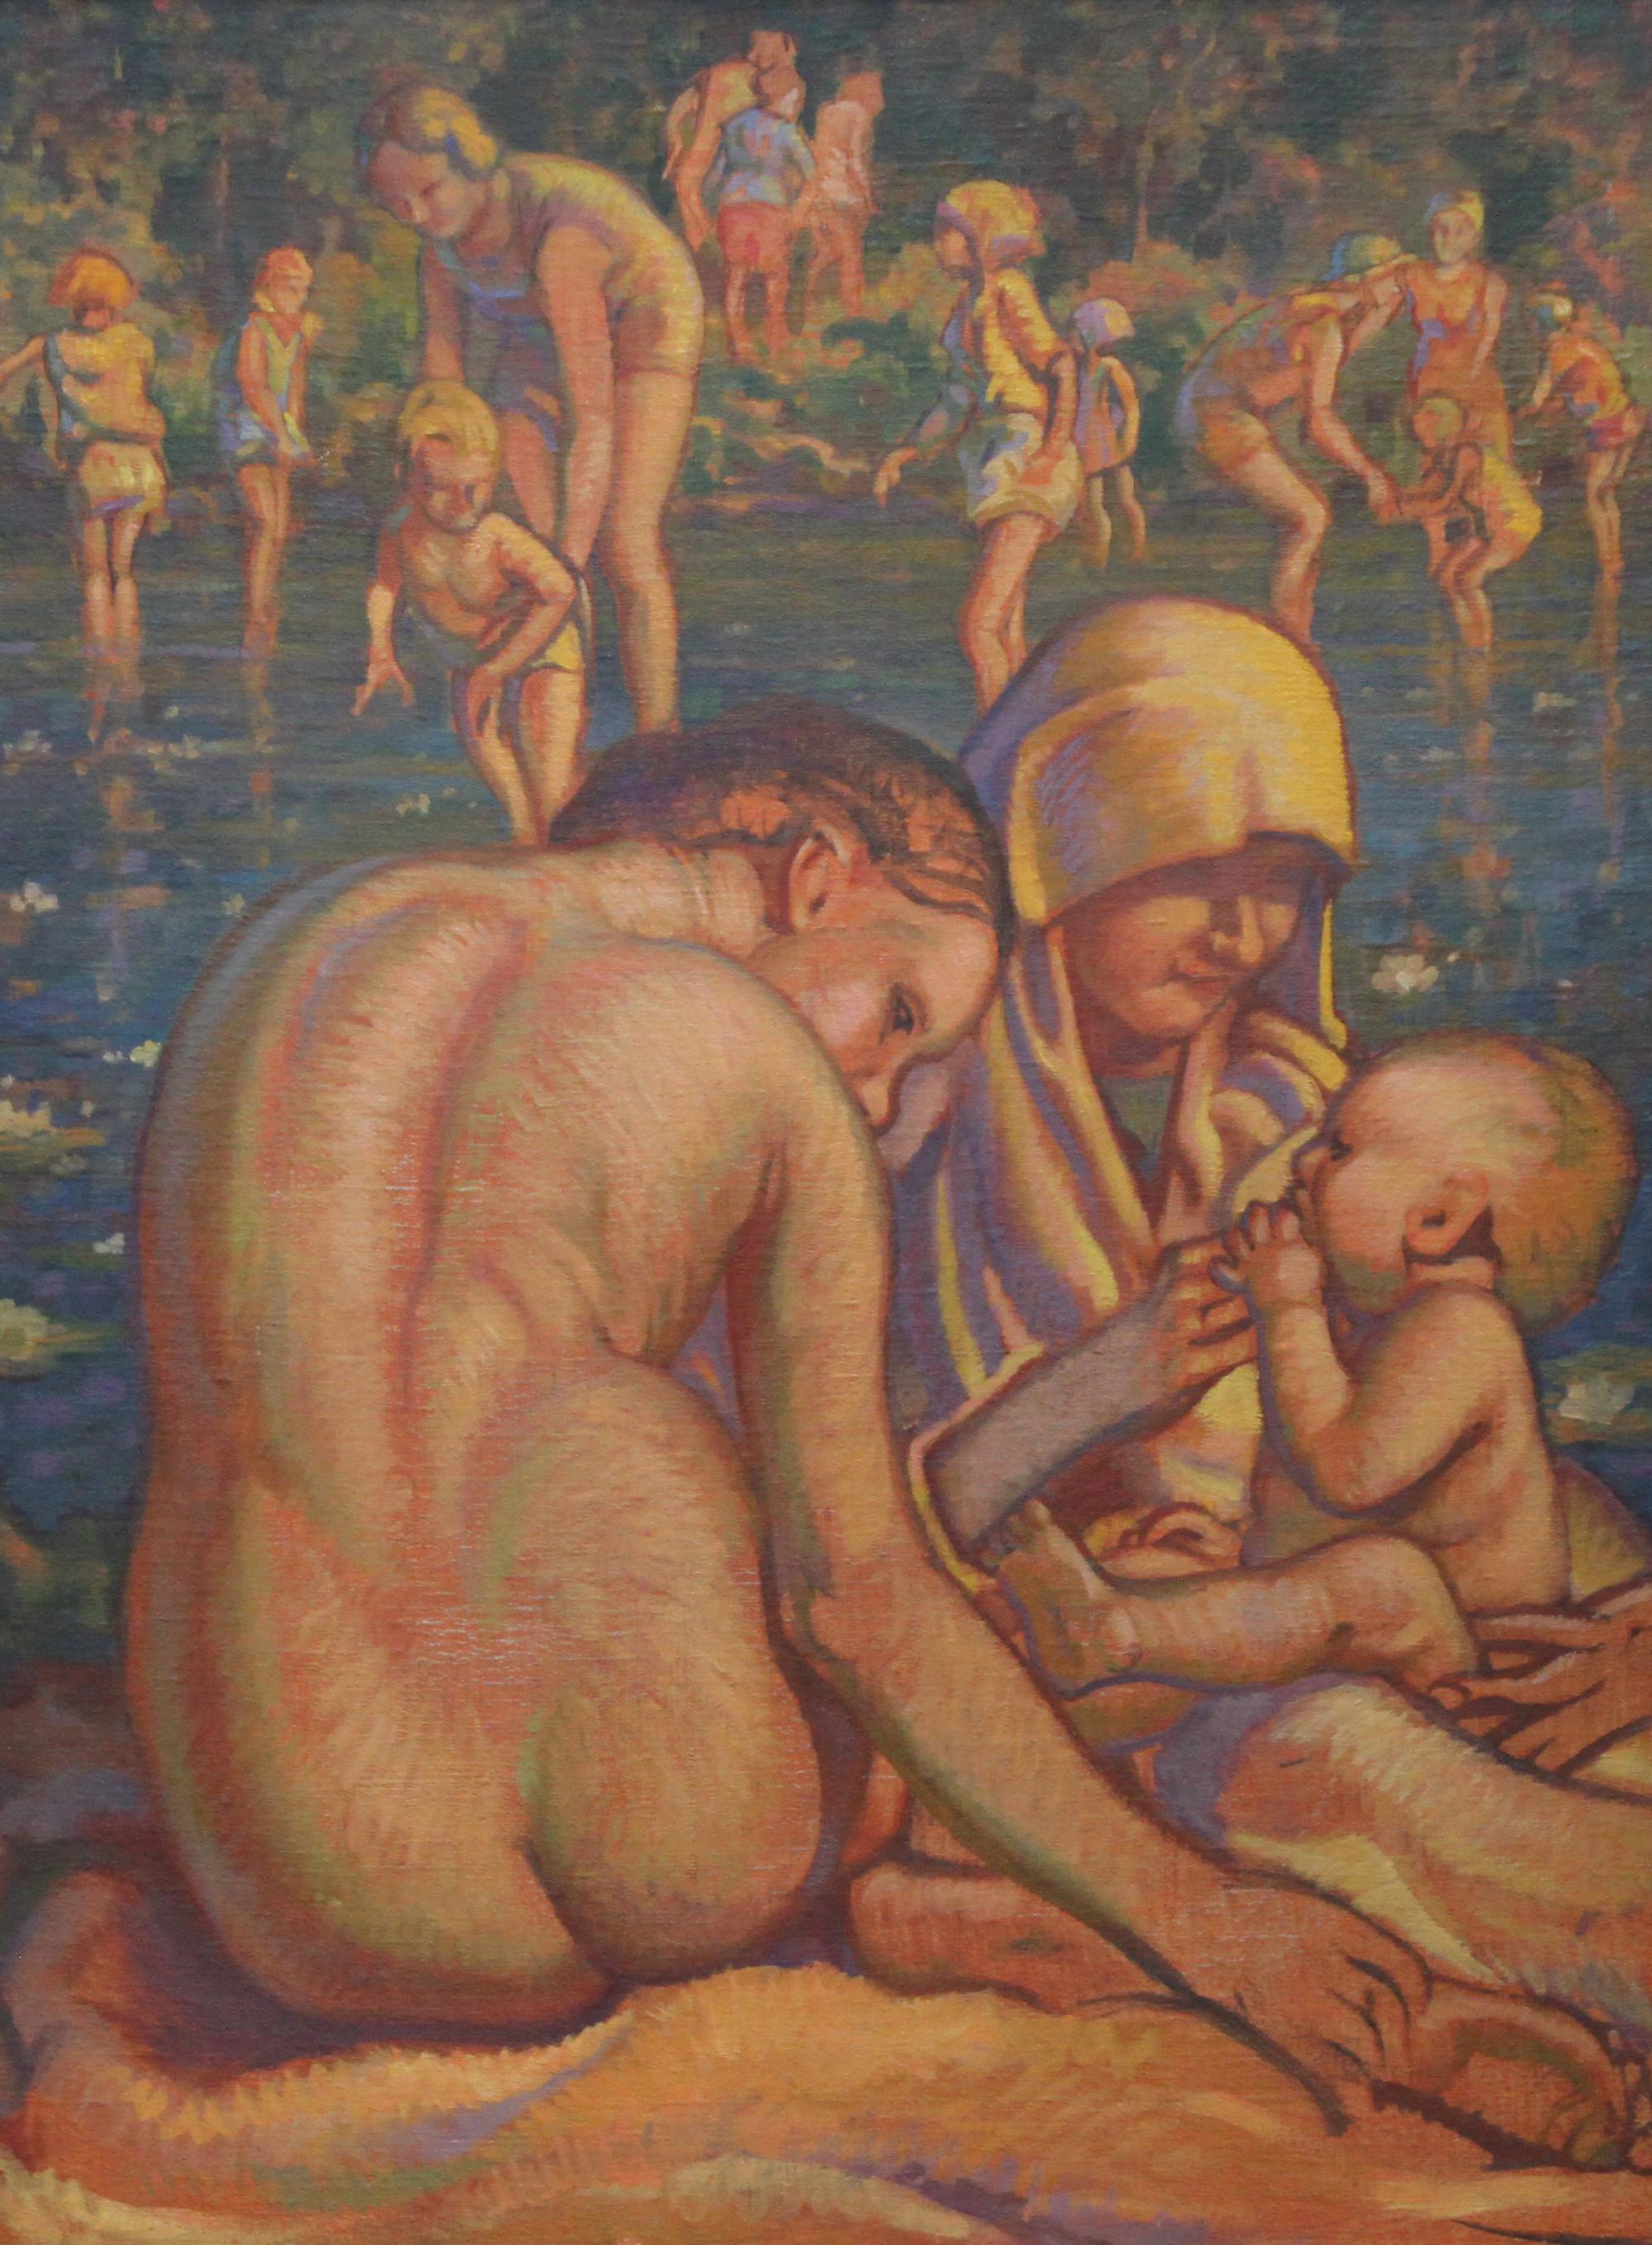 Mother and Child Bathing - British Slade School 30's Art Deco nude oil painting For Sale 2